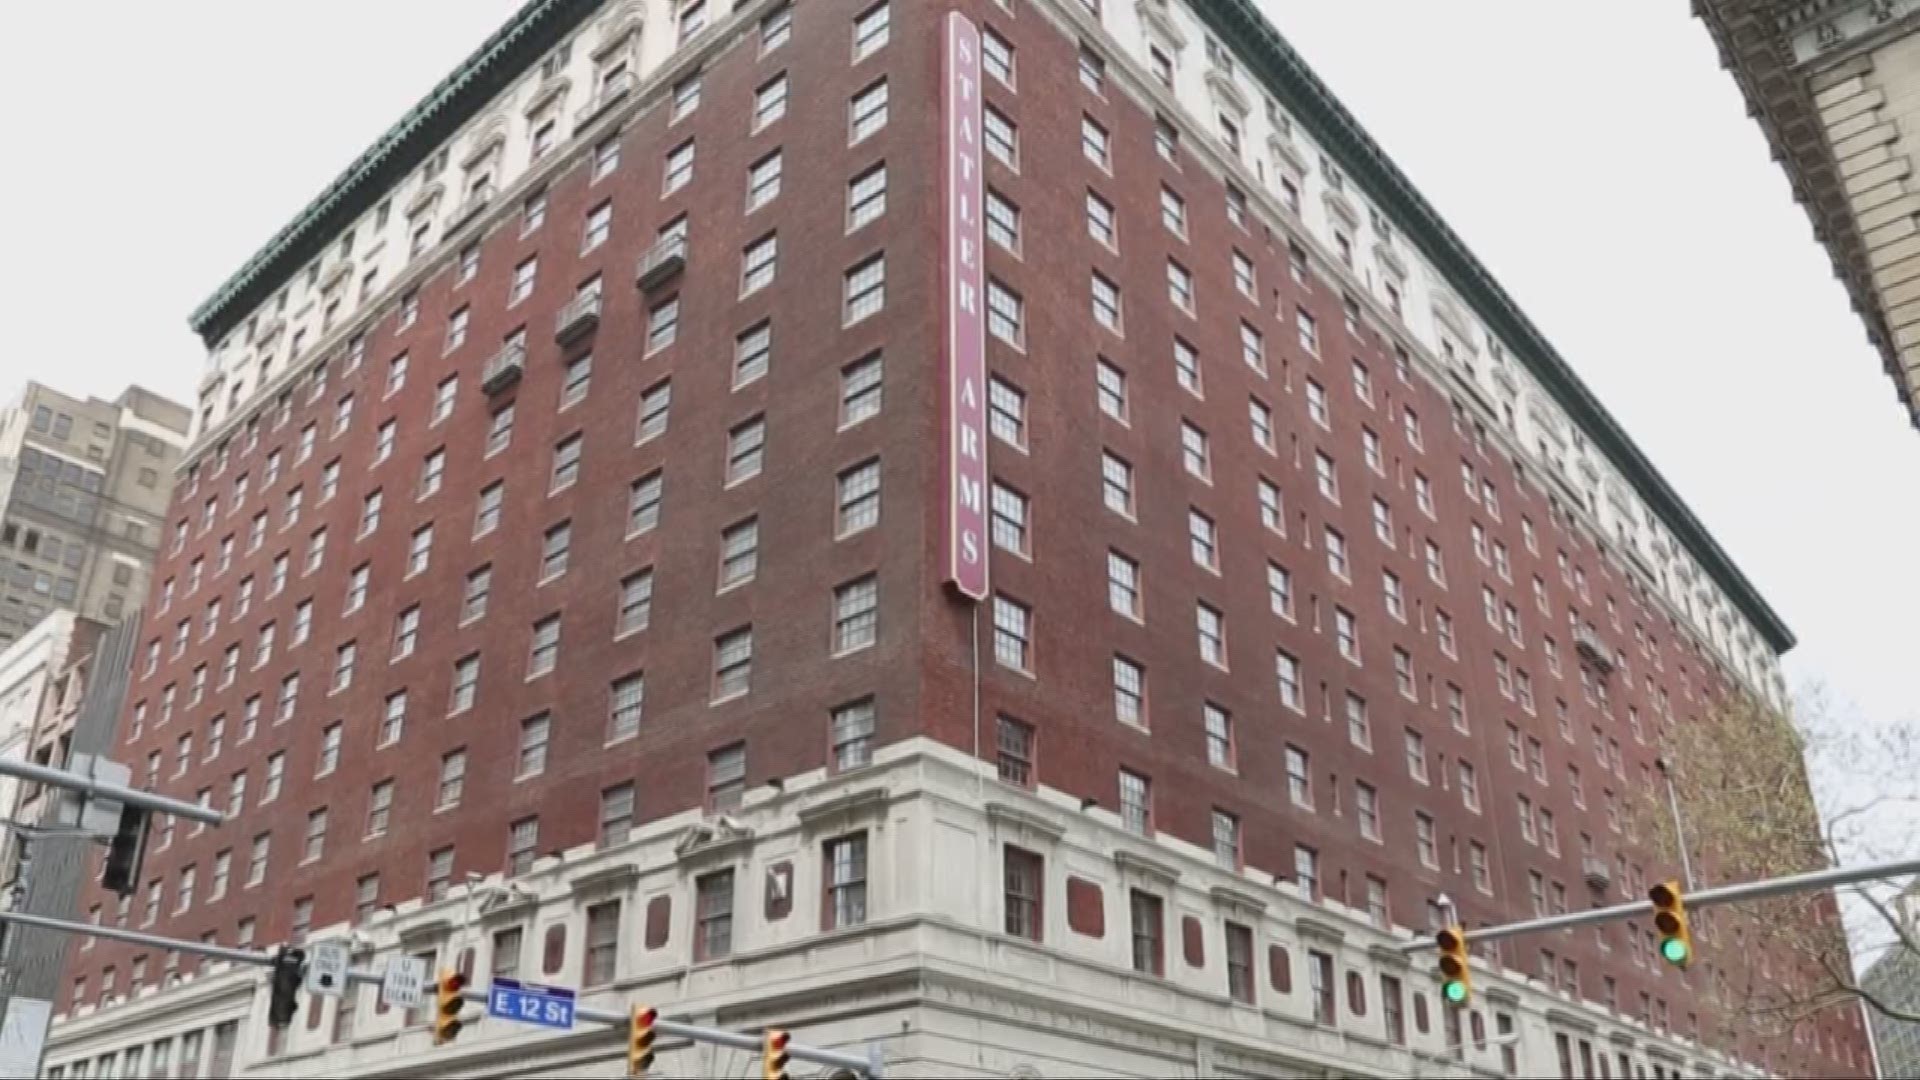 New apartments in old Statler Arms Hotel have given majestic hotel site a new look and life.